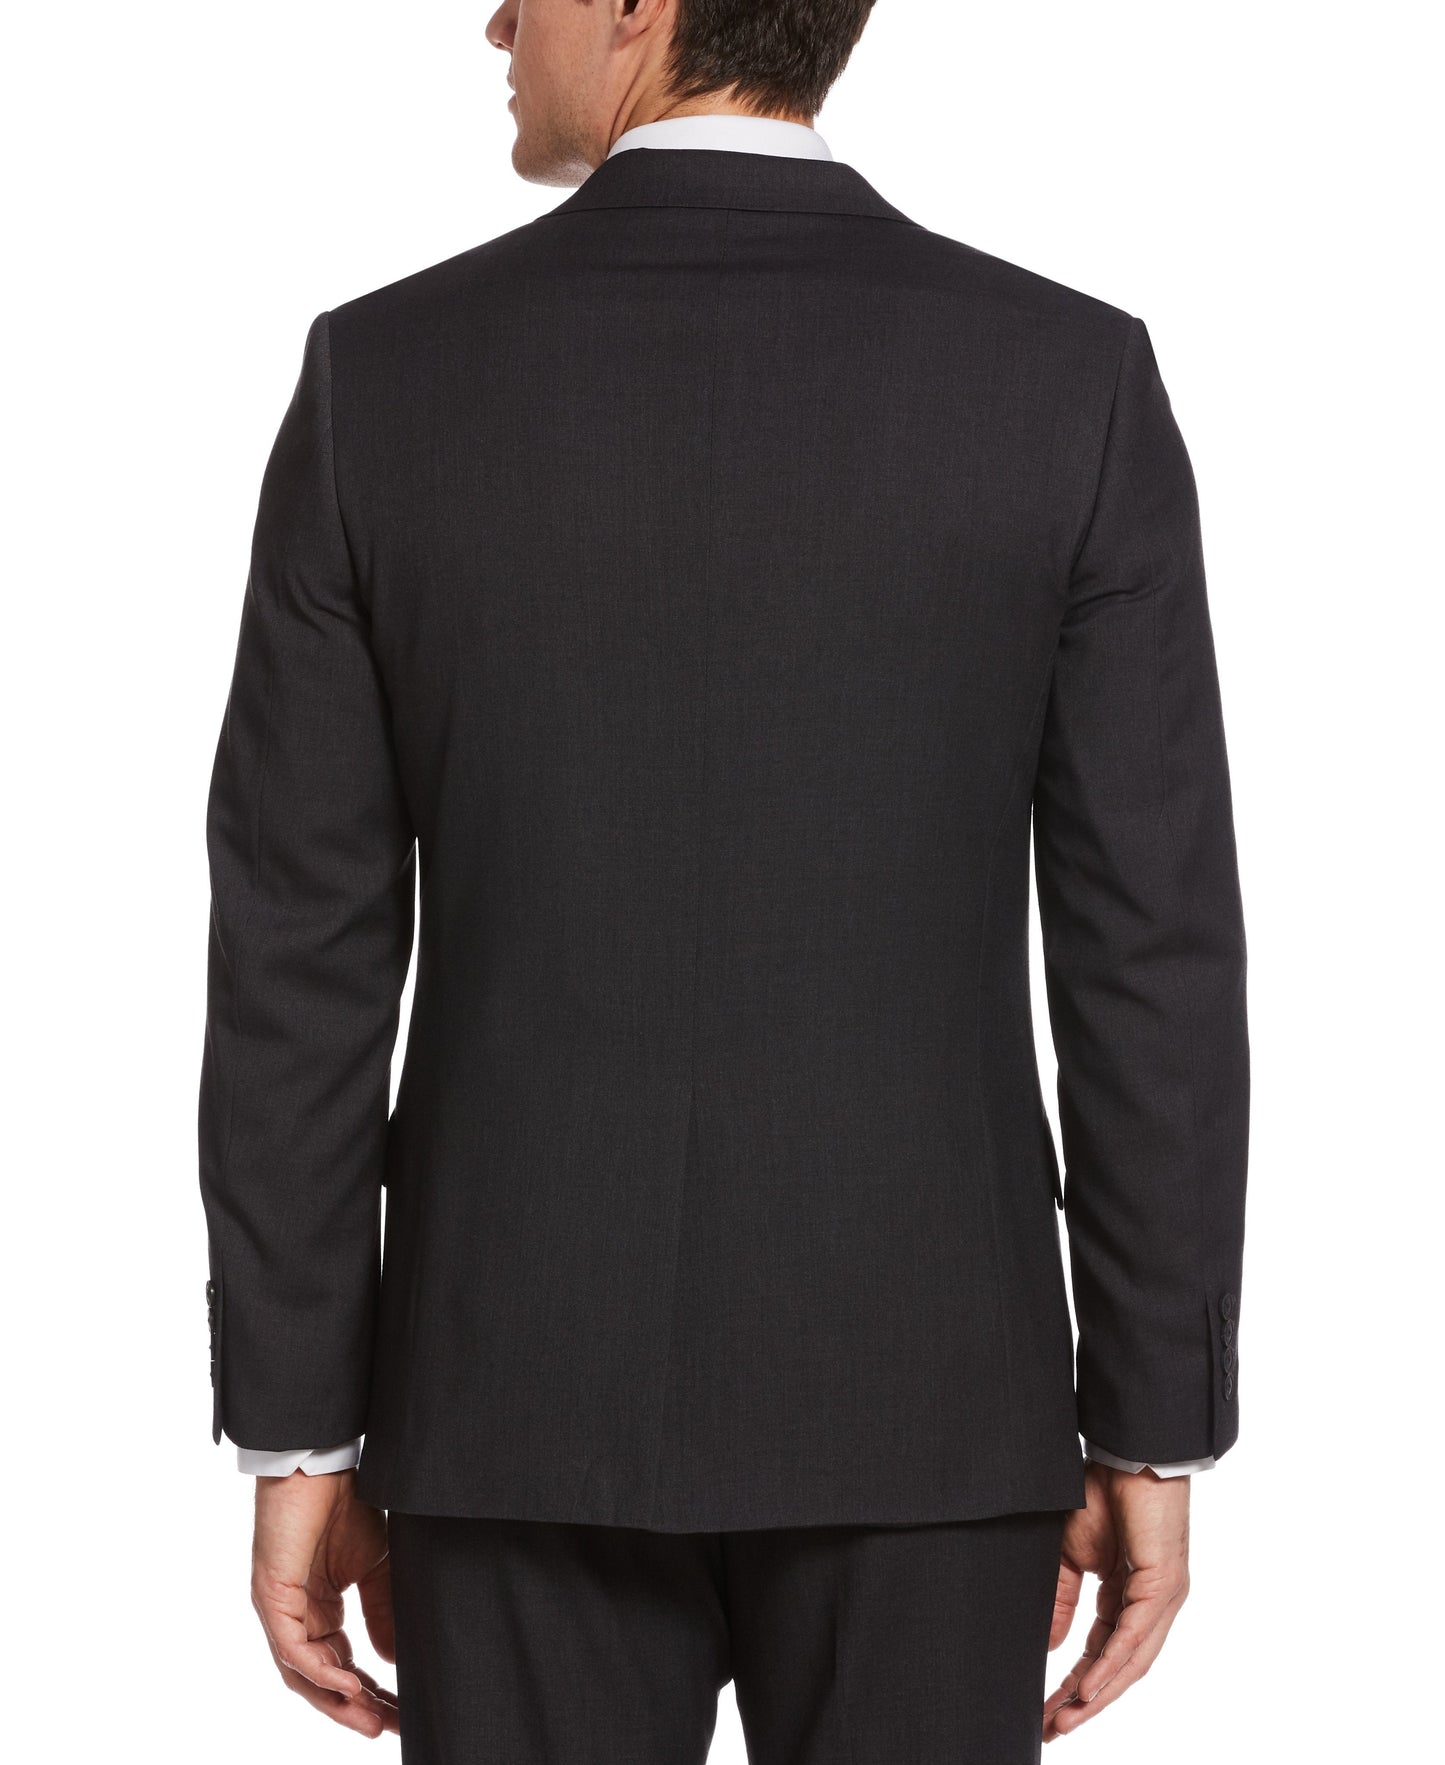 Solid Stretch Suit Jacket